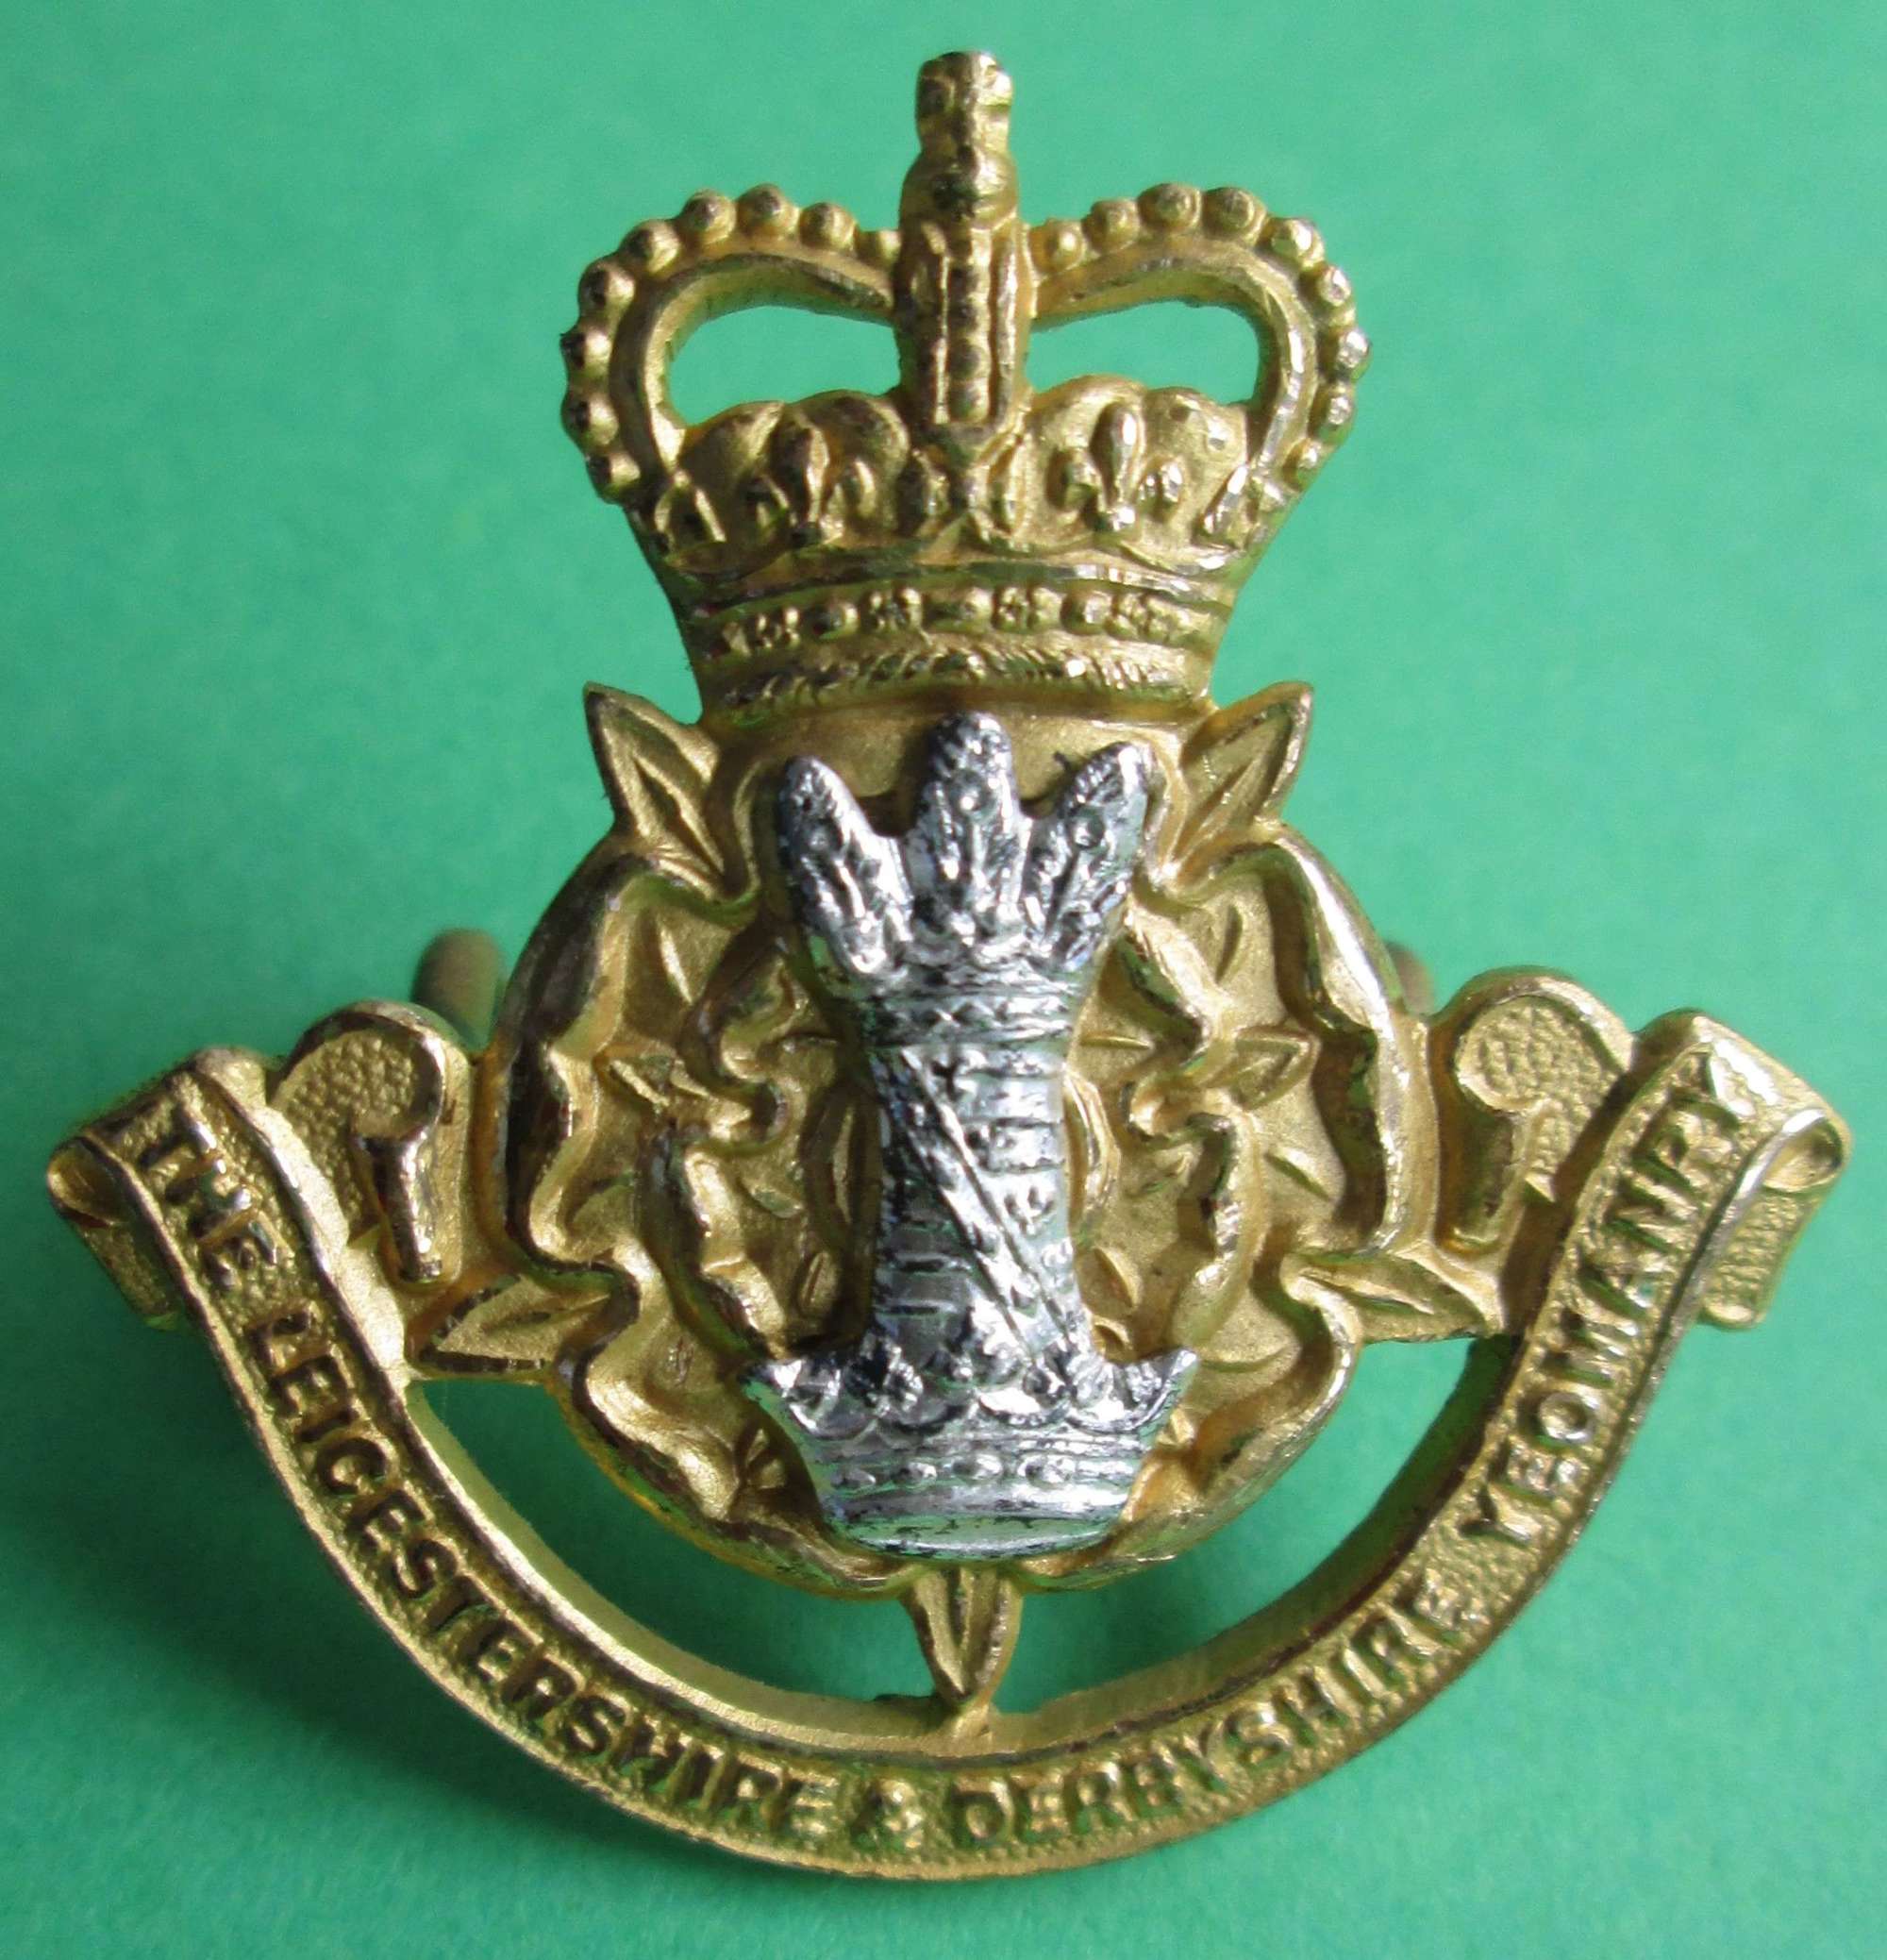 A LEICSTERSHIRE AND DERBYSHIRE YEOMANRY OFFICERS BADGE